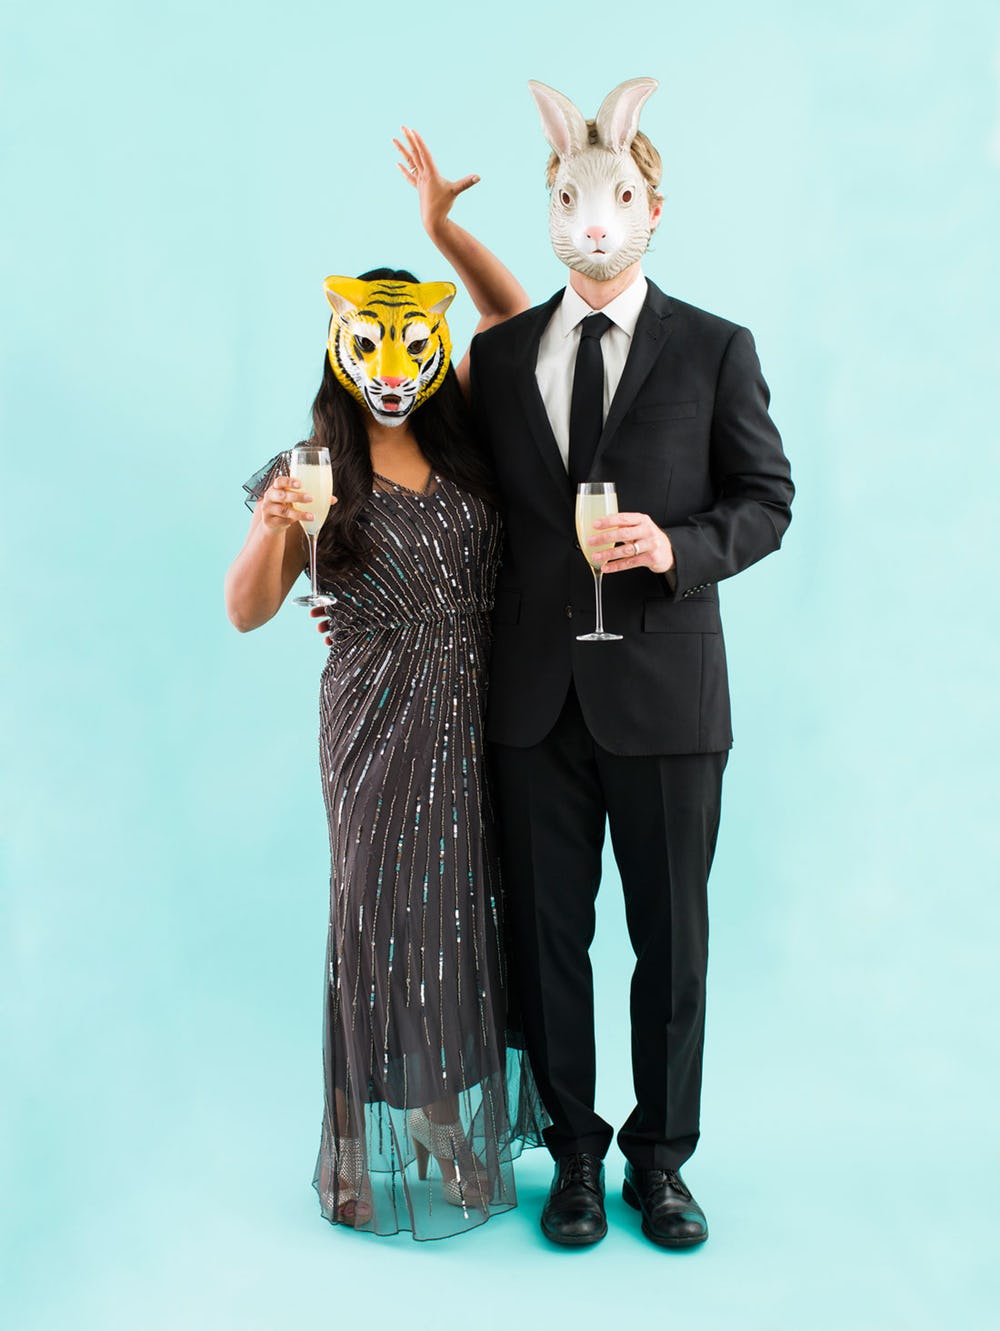 Man and Woman in DIY Couples costume: Party animals